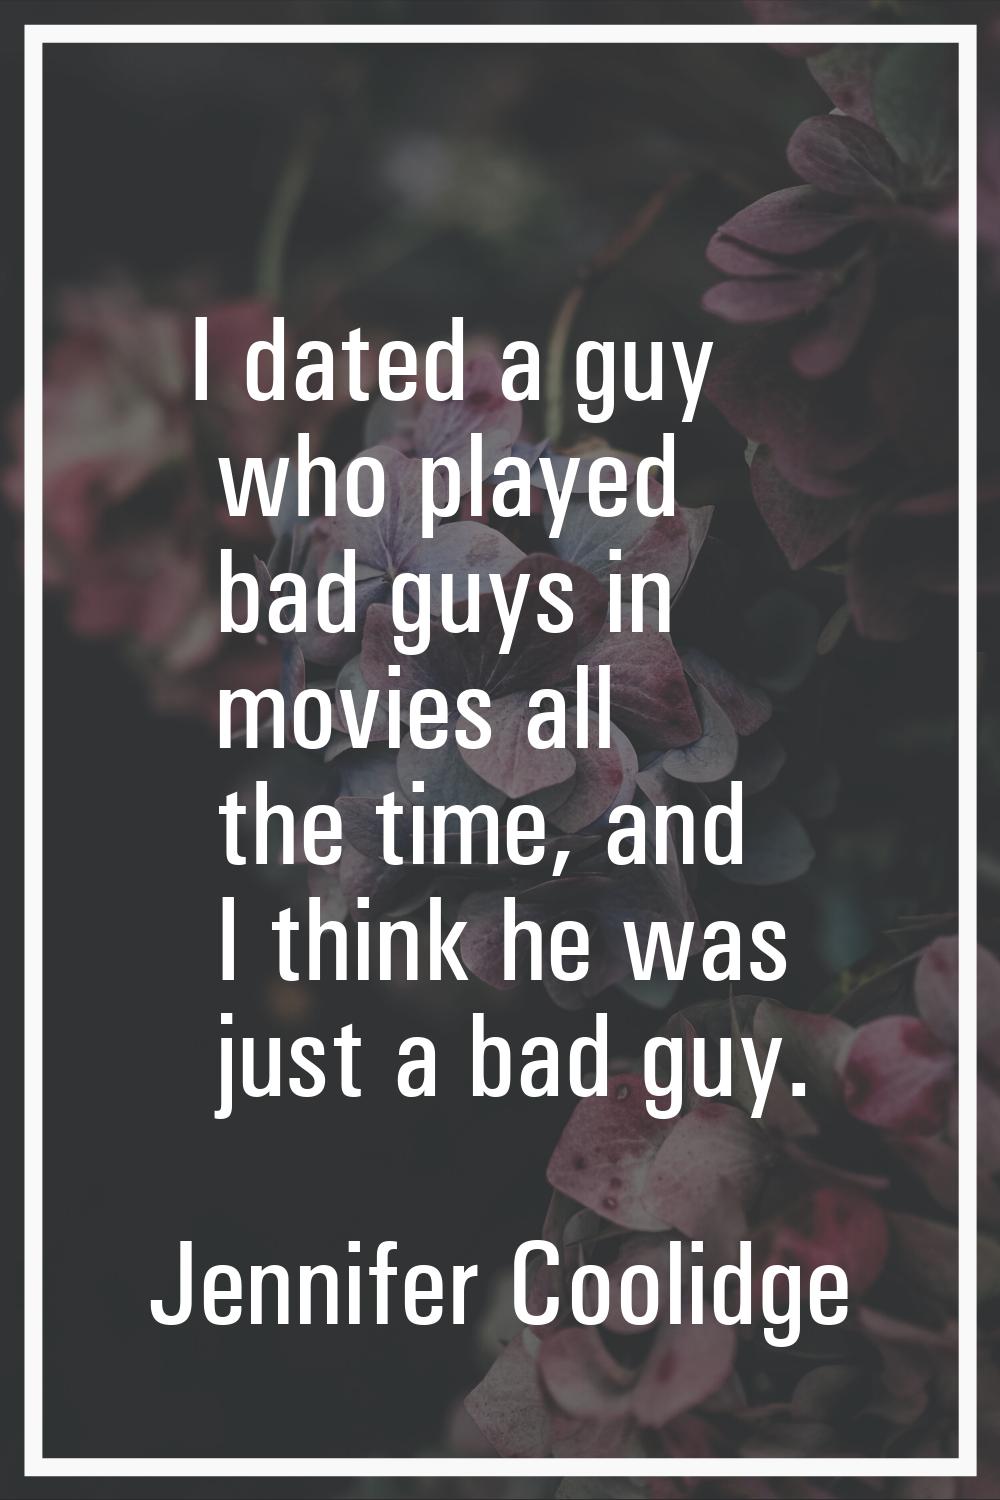 I dated a guy who played bad guys in movies all the time, and I think he was just a bad guy.